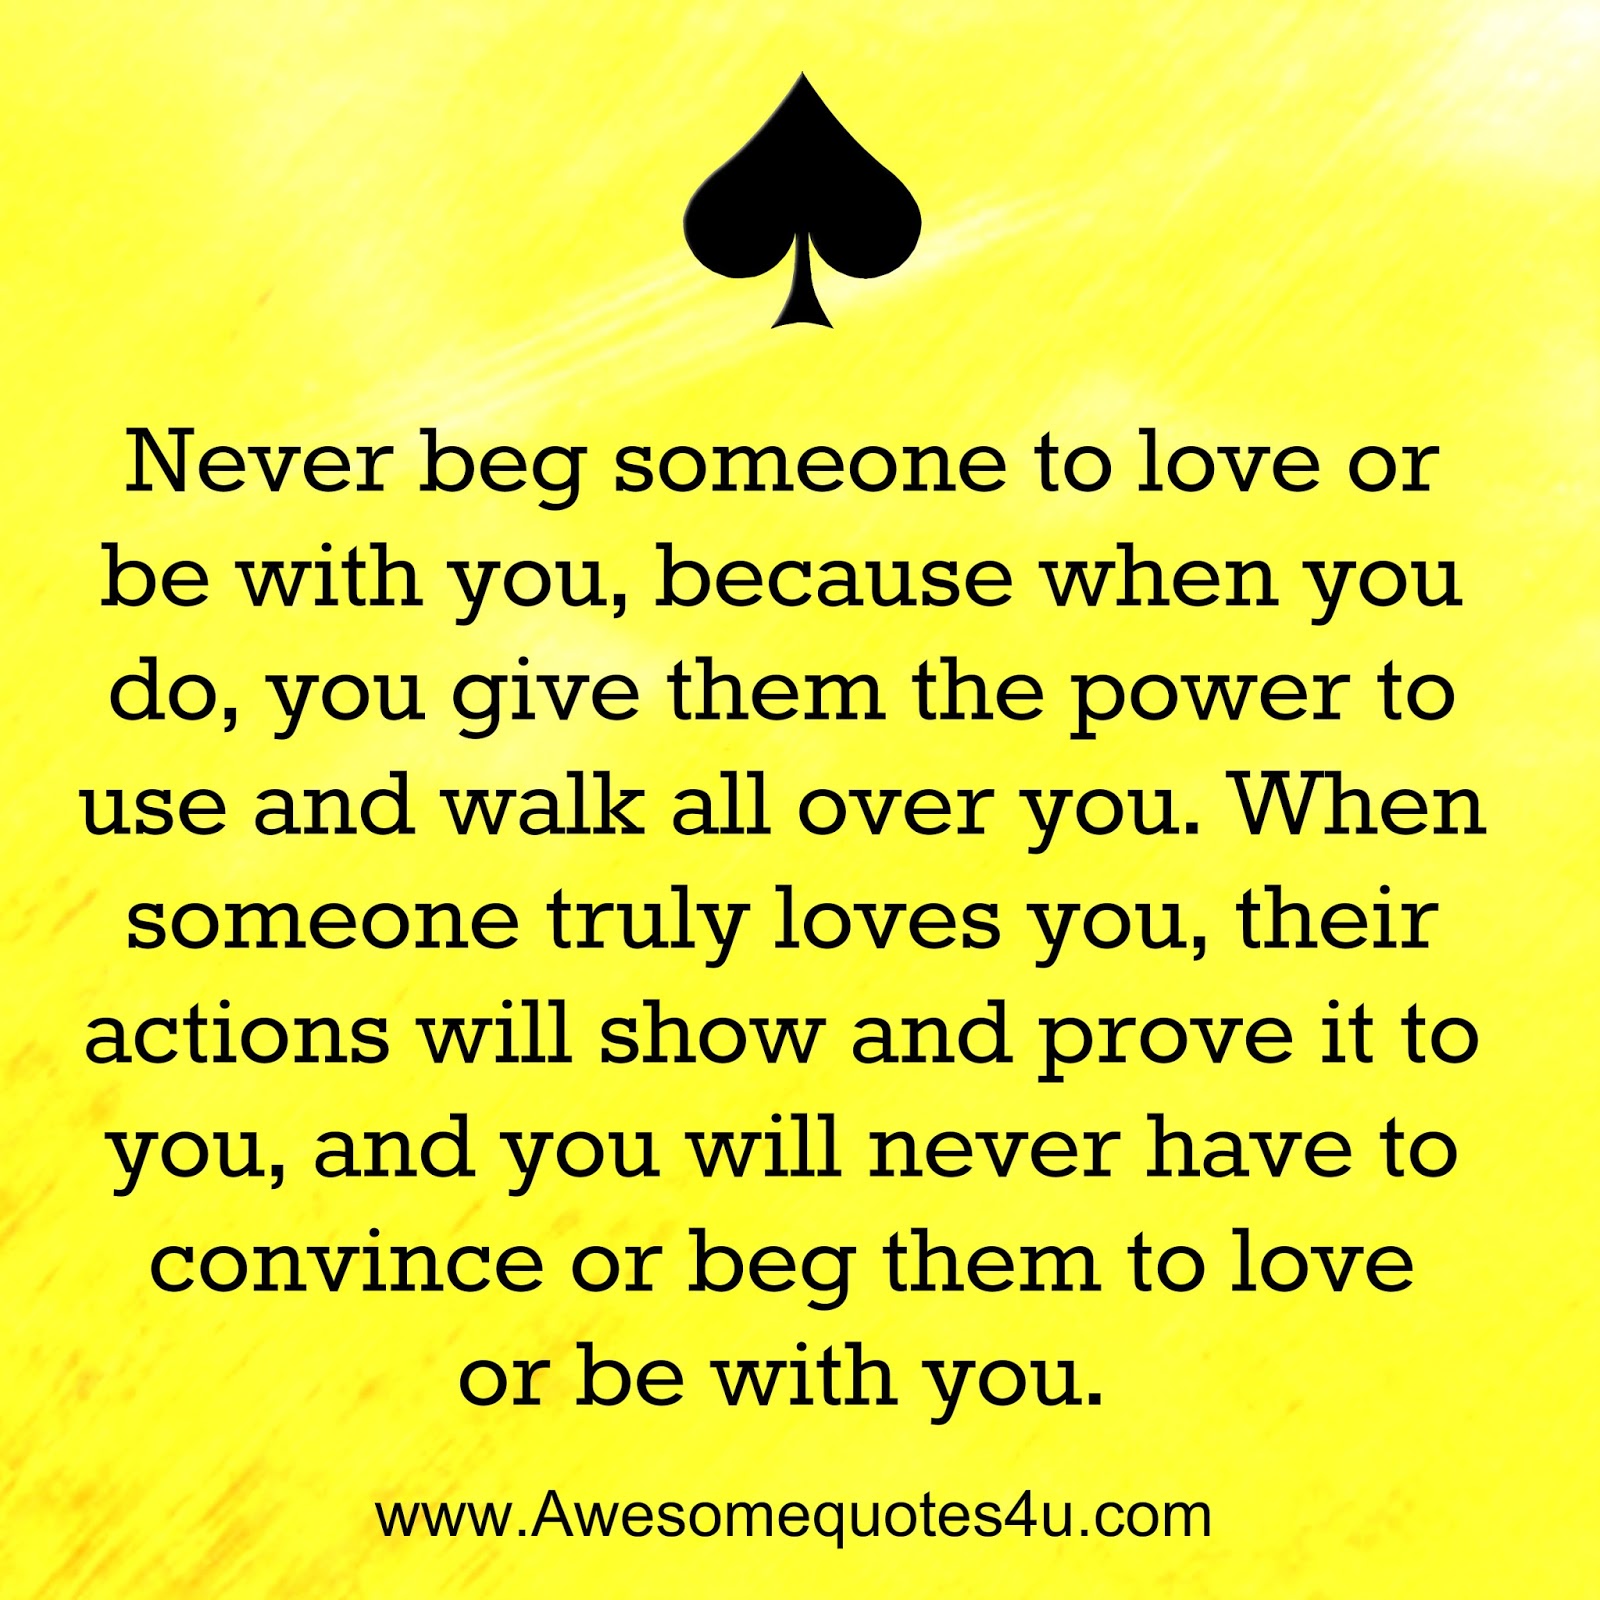 Never beg someone to love or be with you because when you do you give them the power to use and walk all over you When someone truly loves you